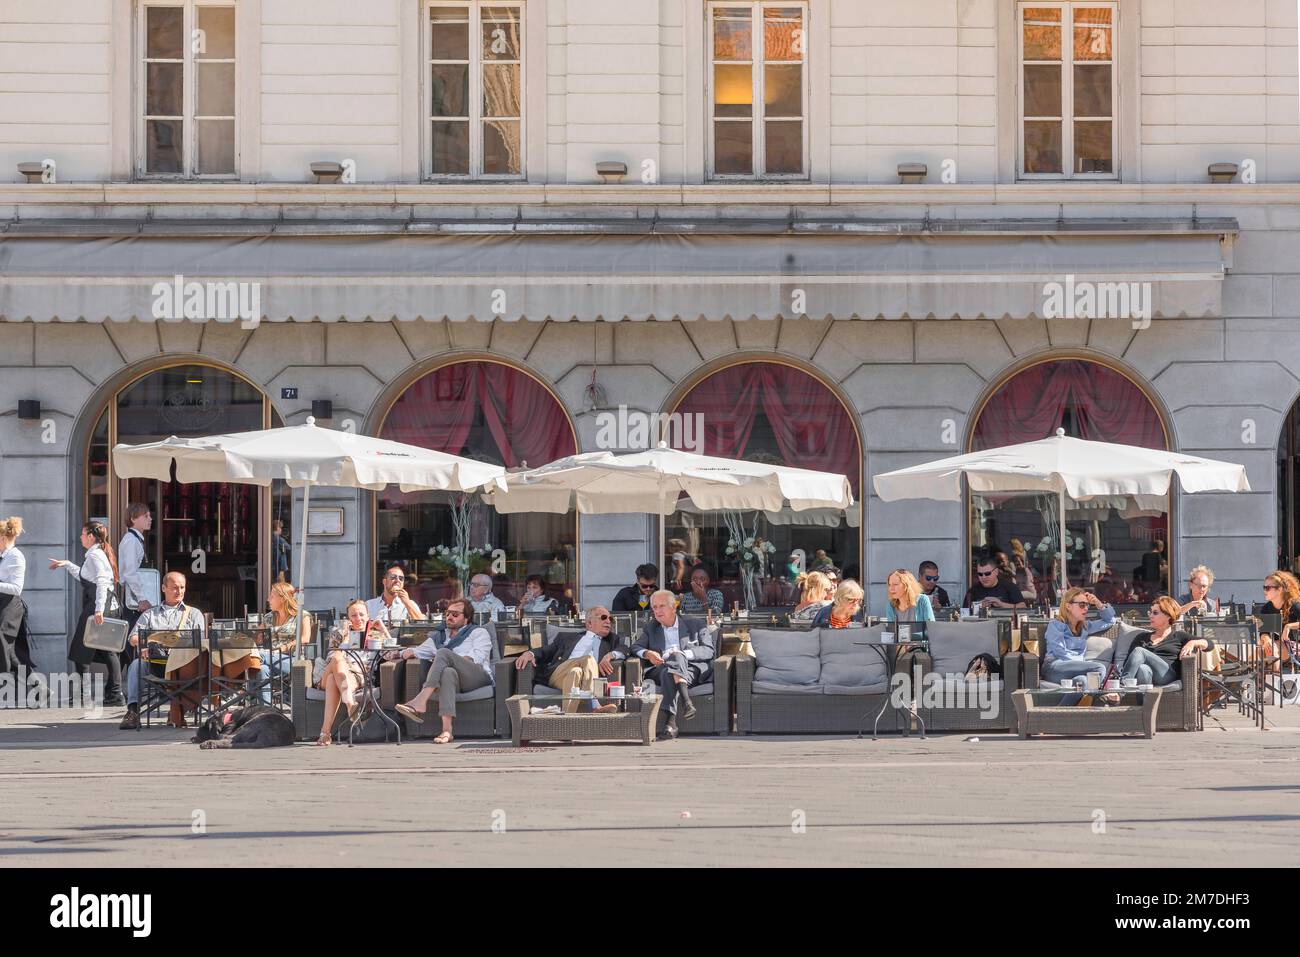 Cafe piazza Italy, view in summer of people sitting at cafe tables in the Piazza Unita d'Italia in the city of Trieste, Friuli-Venezia Giulia, Italy Stock Photo